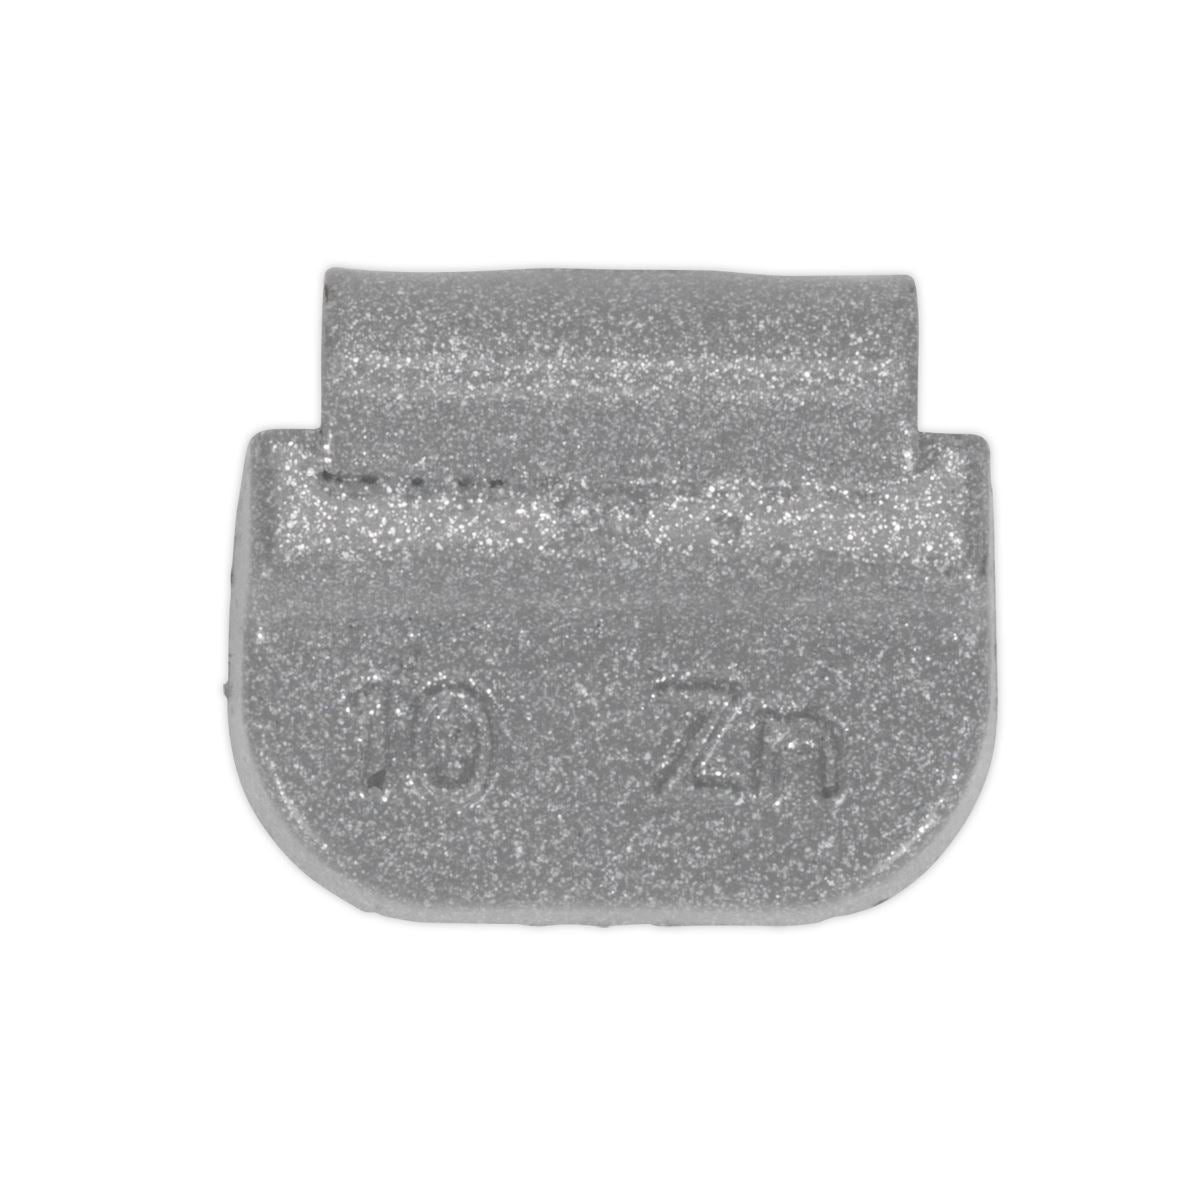 Sealey Wheel Weight 10g Hammer-On Zinc for Steel Wheels Pack of 100